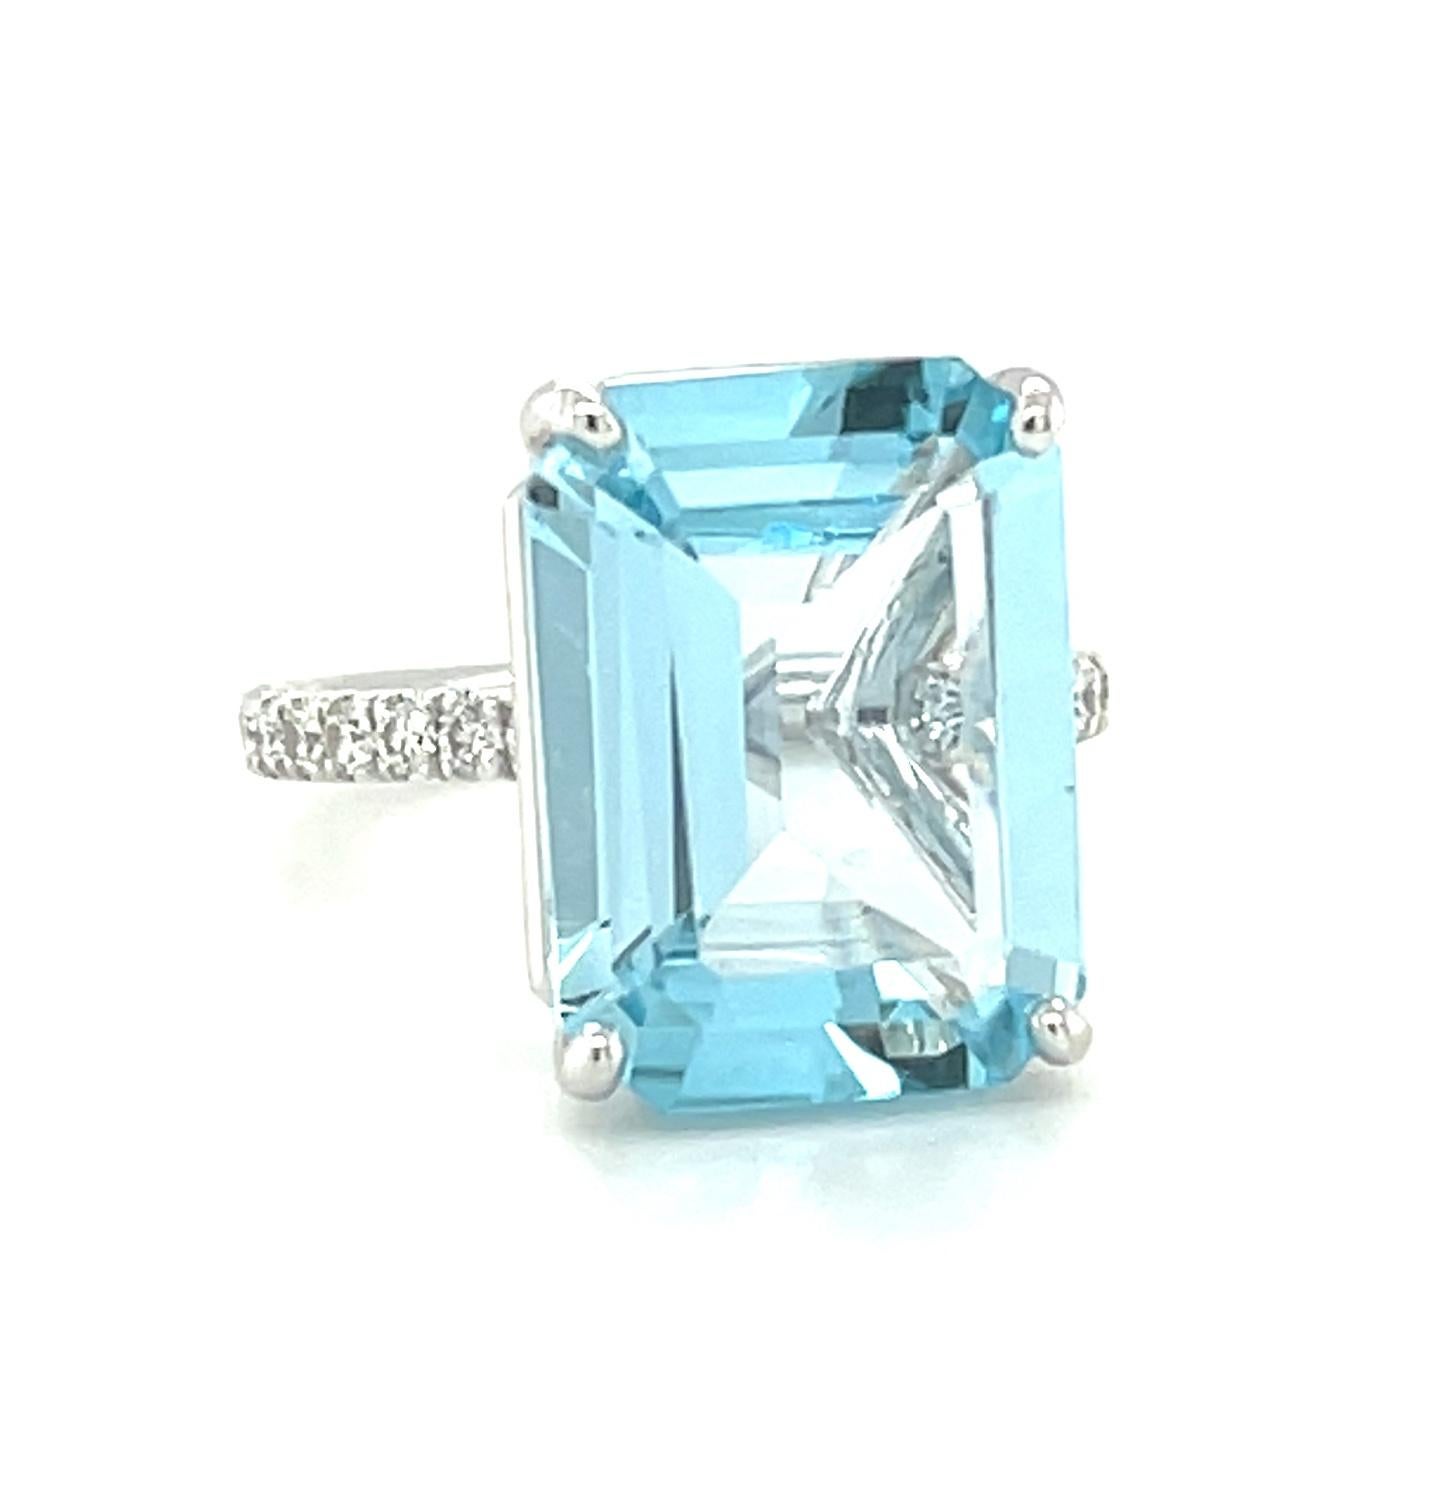 This gorgeous platinum ring features a large, 10.51 carat, emerald-cut blue topaz with beautiful bright, sky blue color! 
24 sparkling diamonds weighing .50 carat total have been masterfully set by hand in the rounded band for a look that is